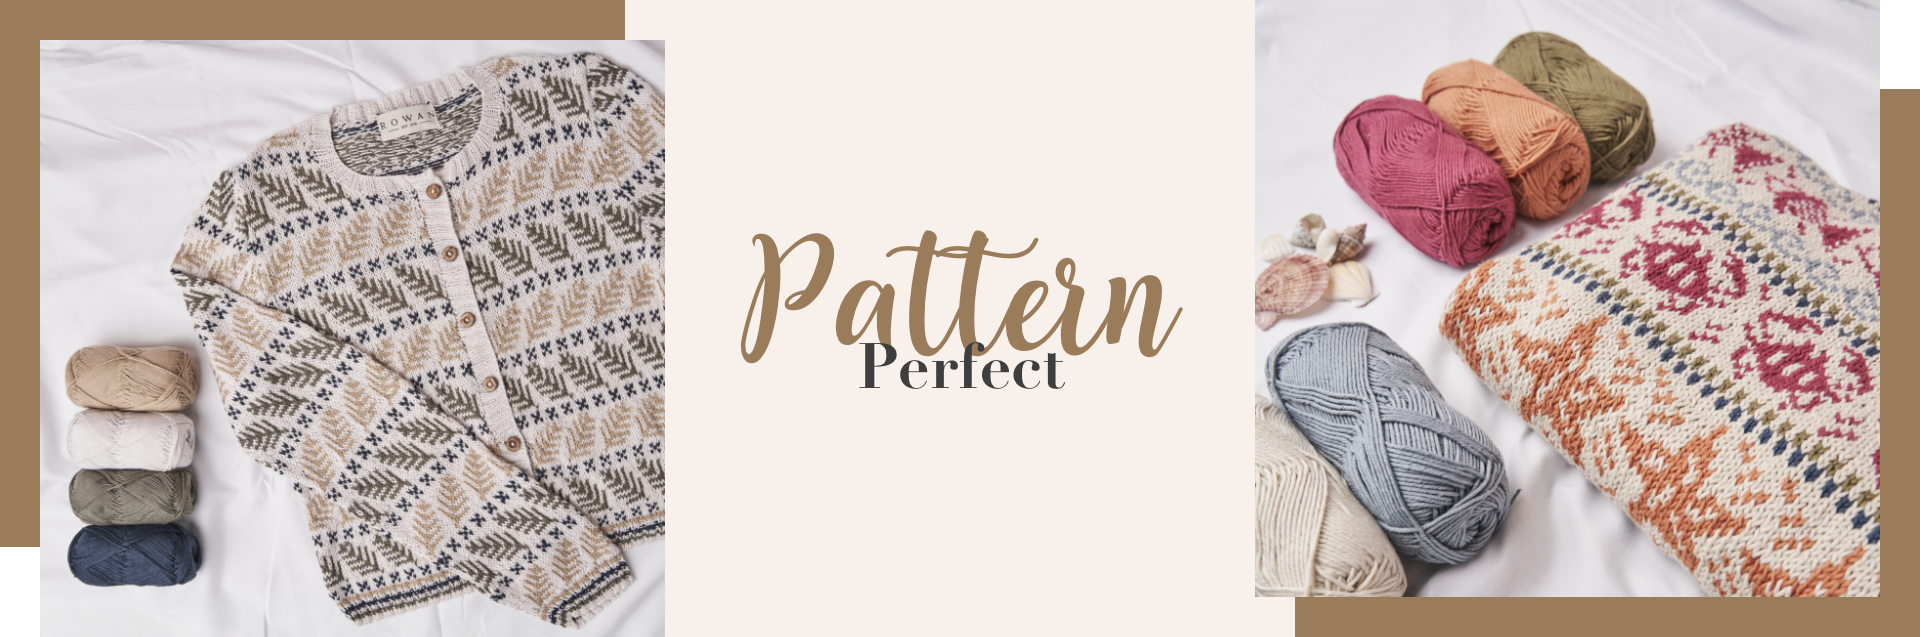 Pattern perfect banner